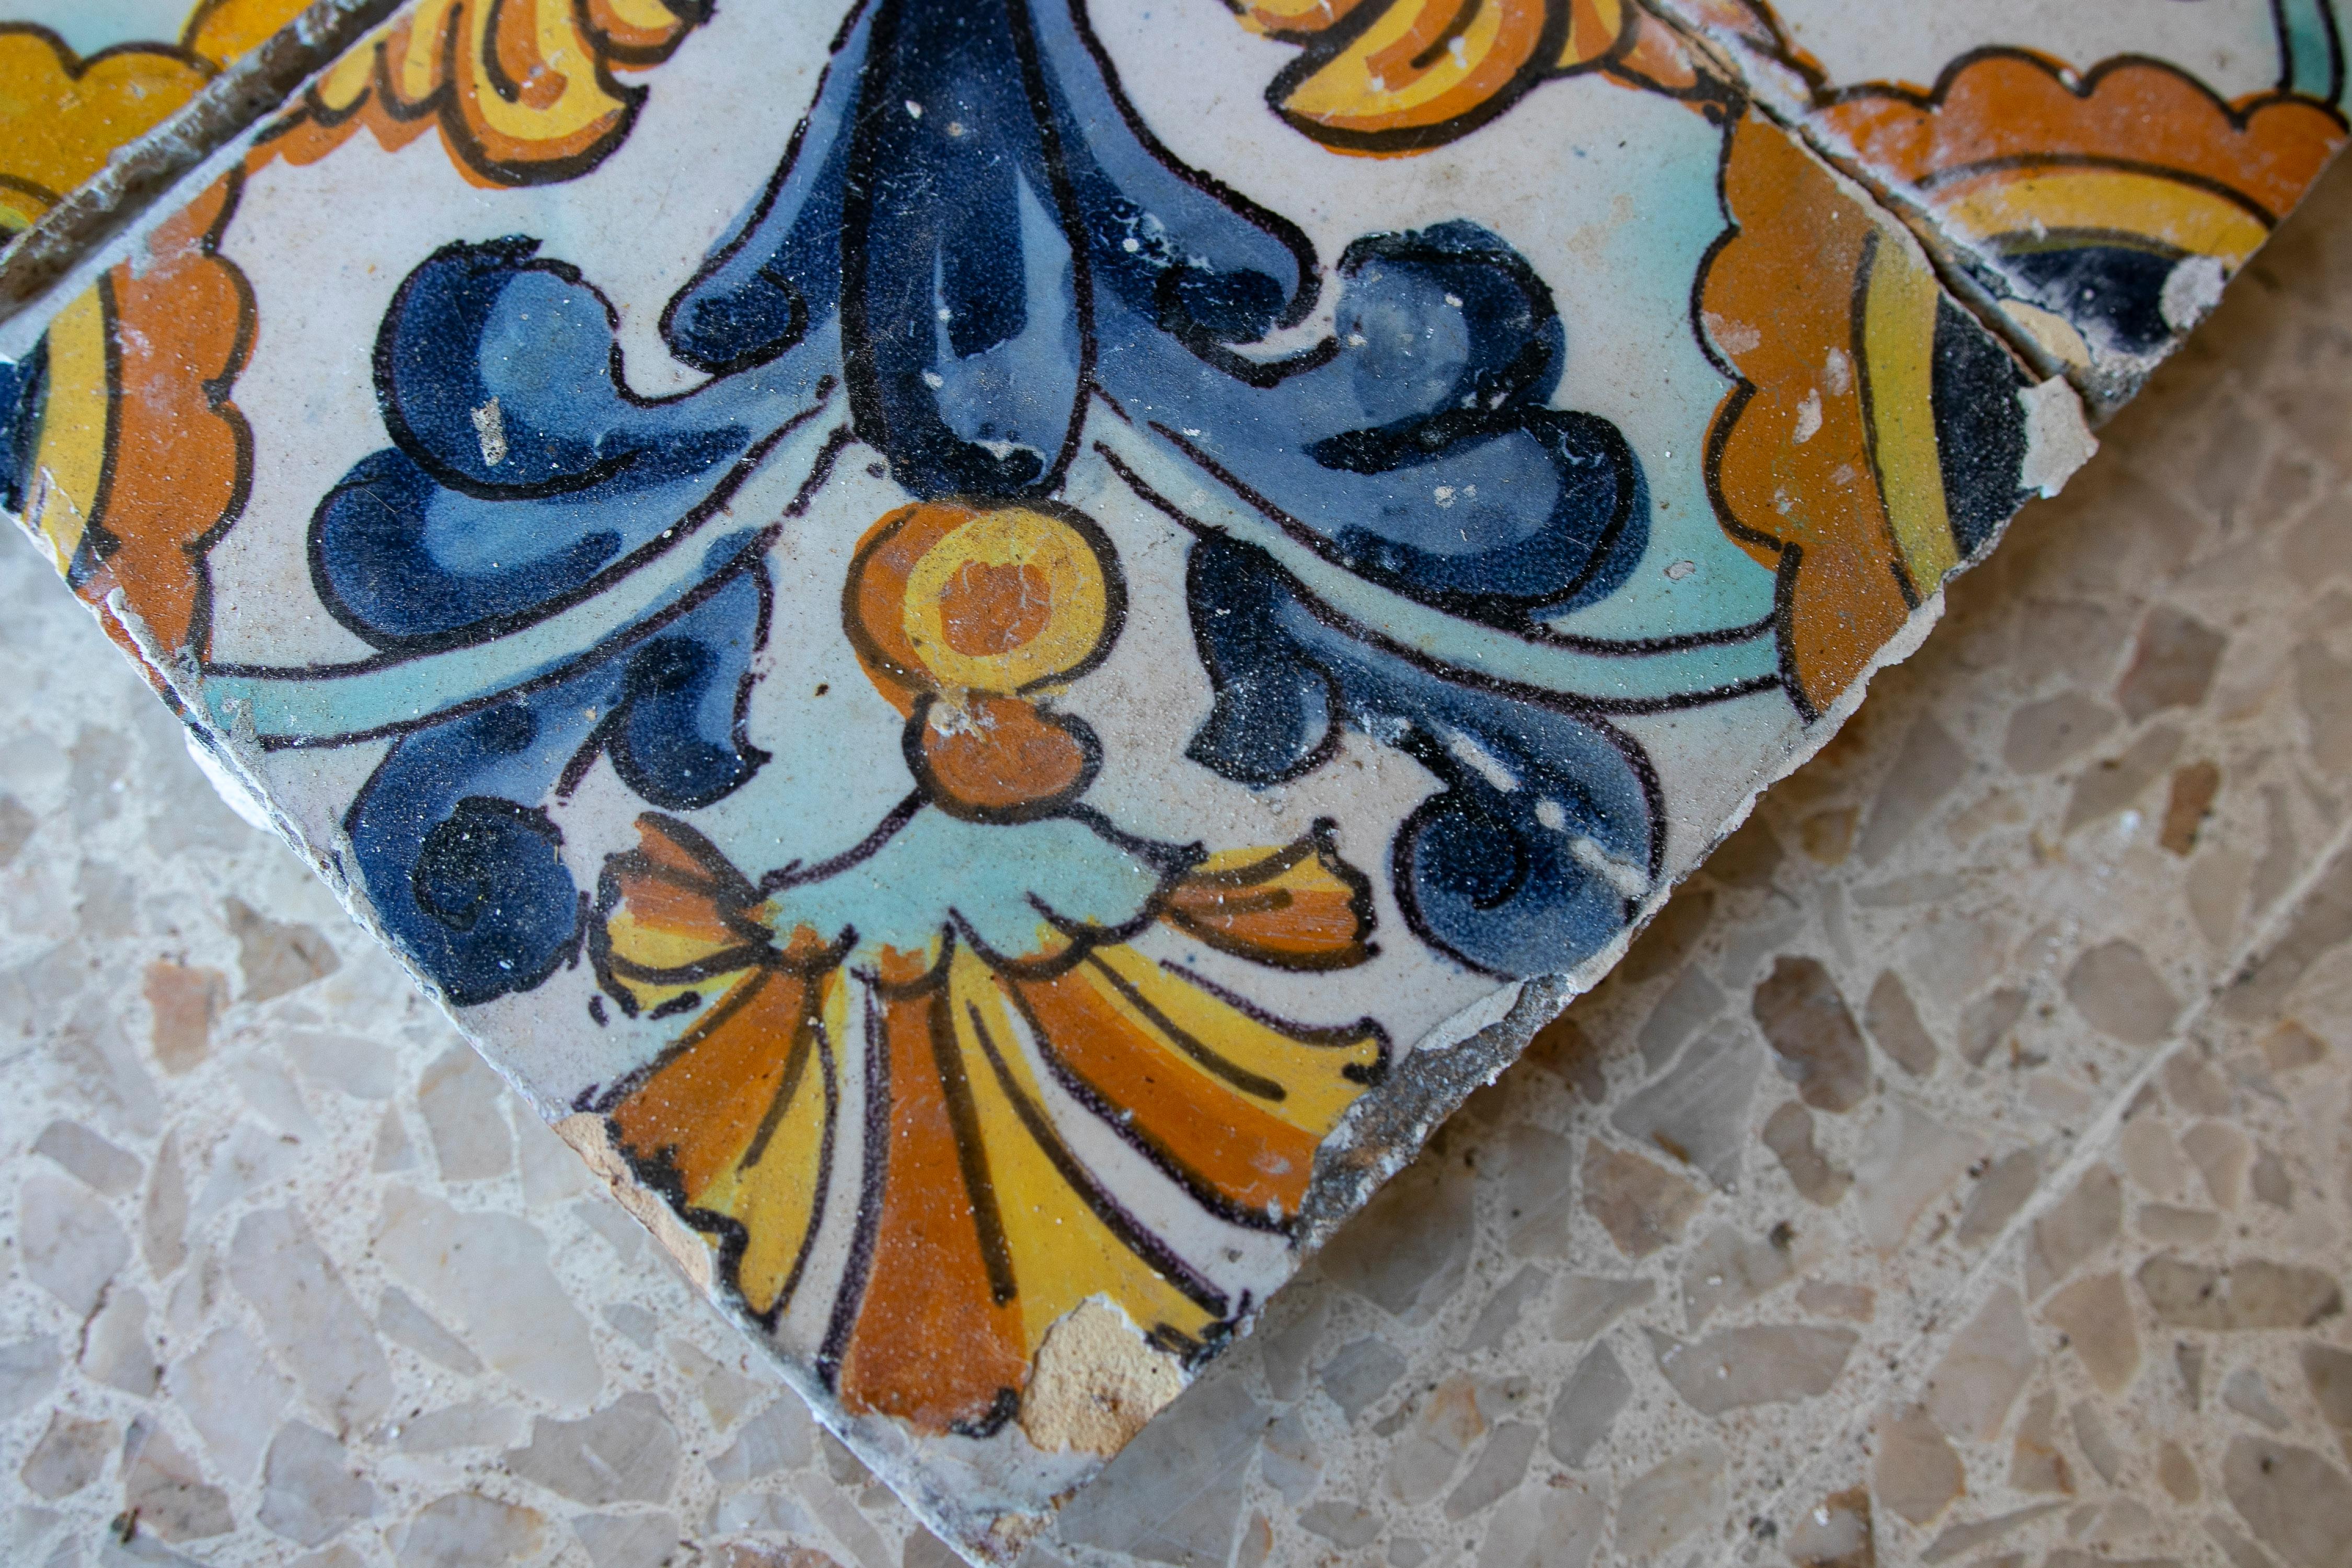 Set of 4 Mid-19th Century Spanish Hand Painted Patterned Glazed Ceramic Tiles 9